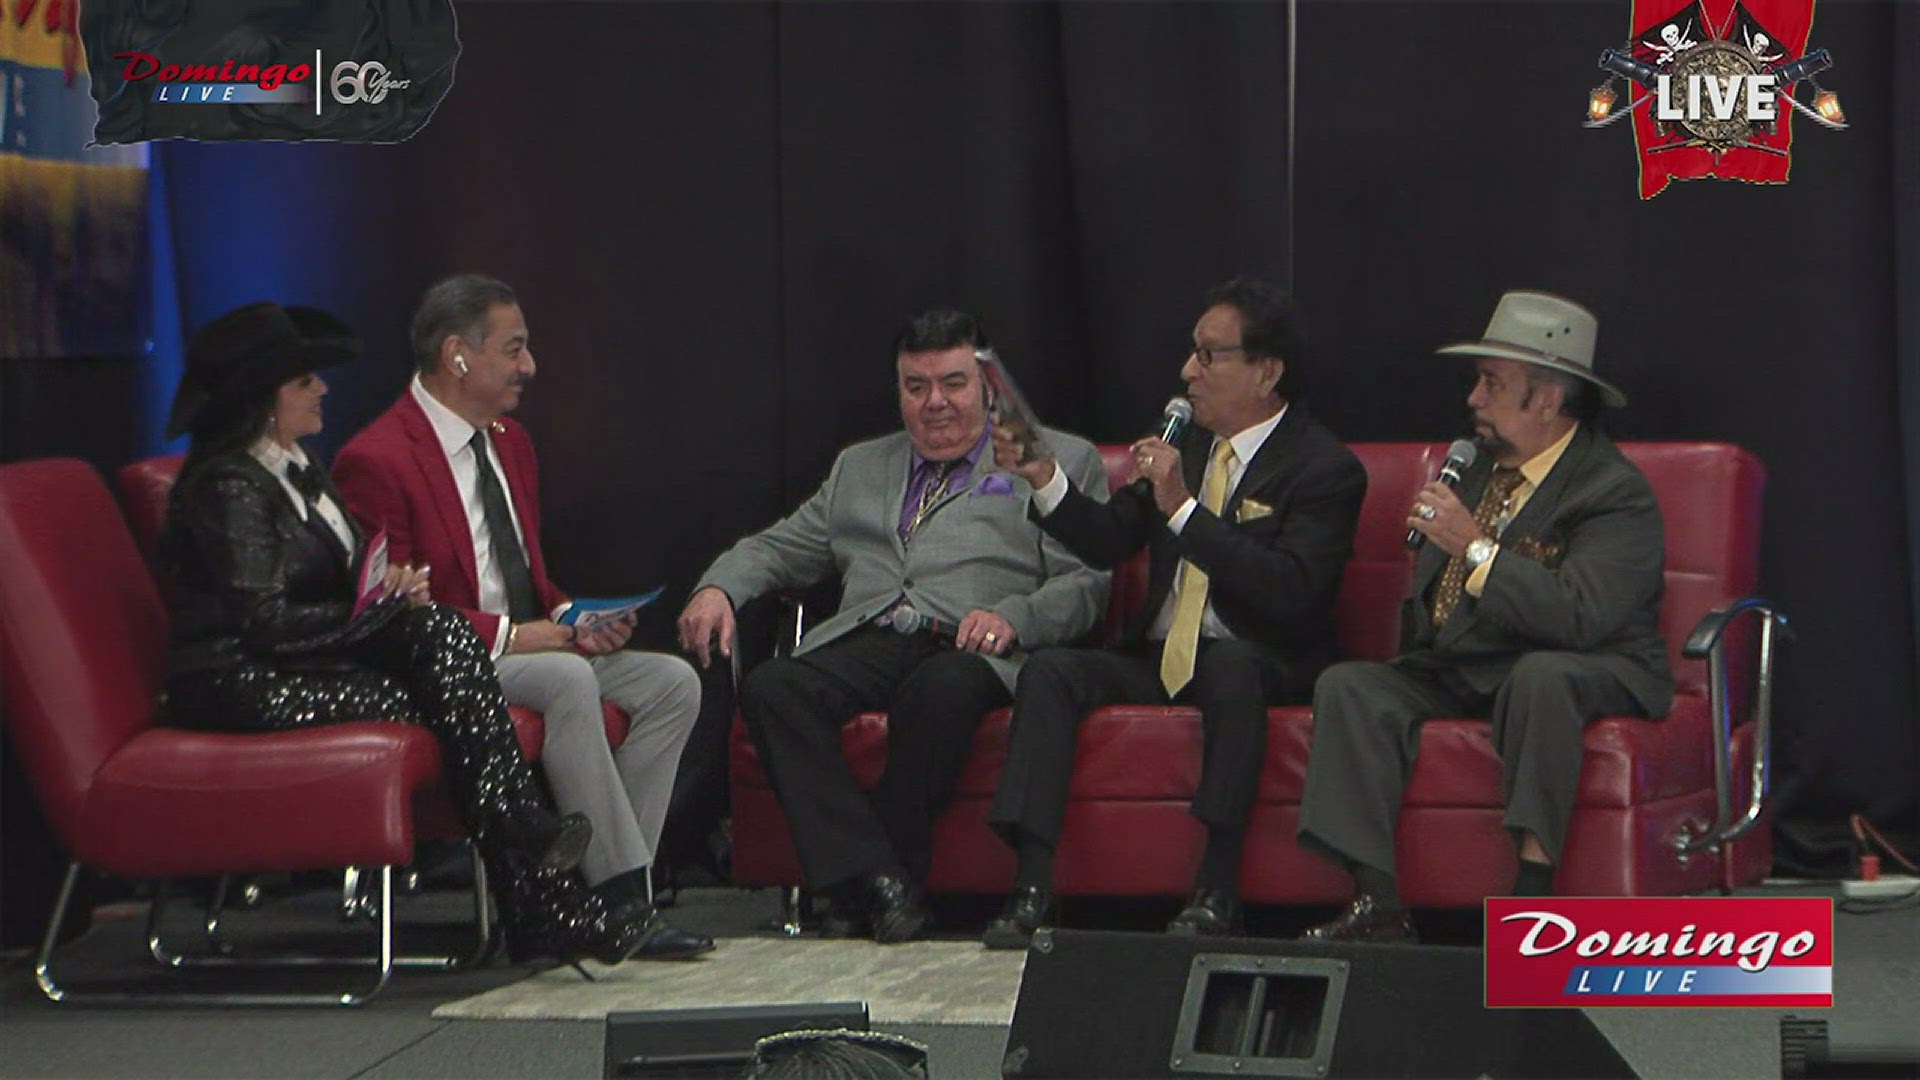 Sunny Ozuna, Freddie Martinez and Carlos Guzman talk about the 'character' that is the Domingo Live! show's namesake.